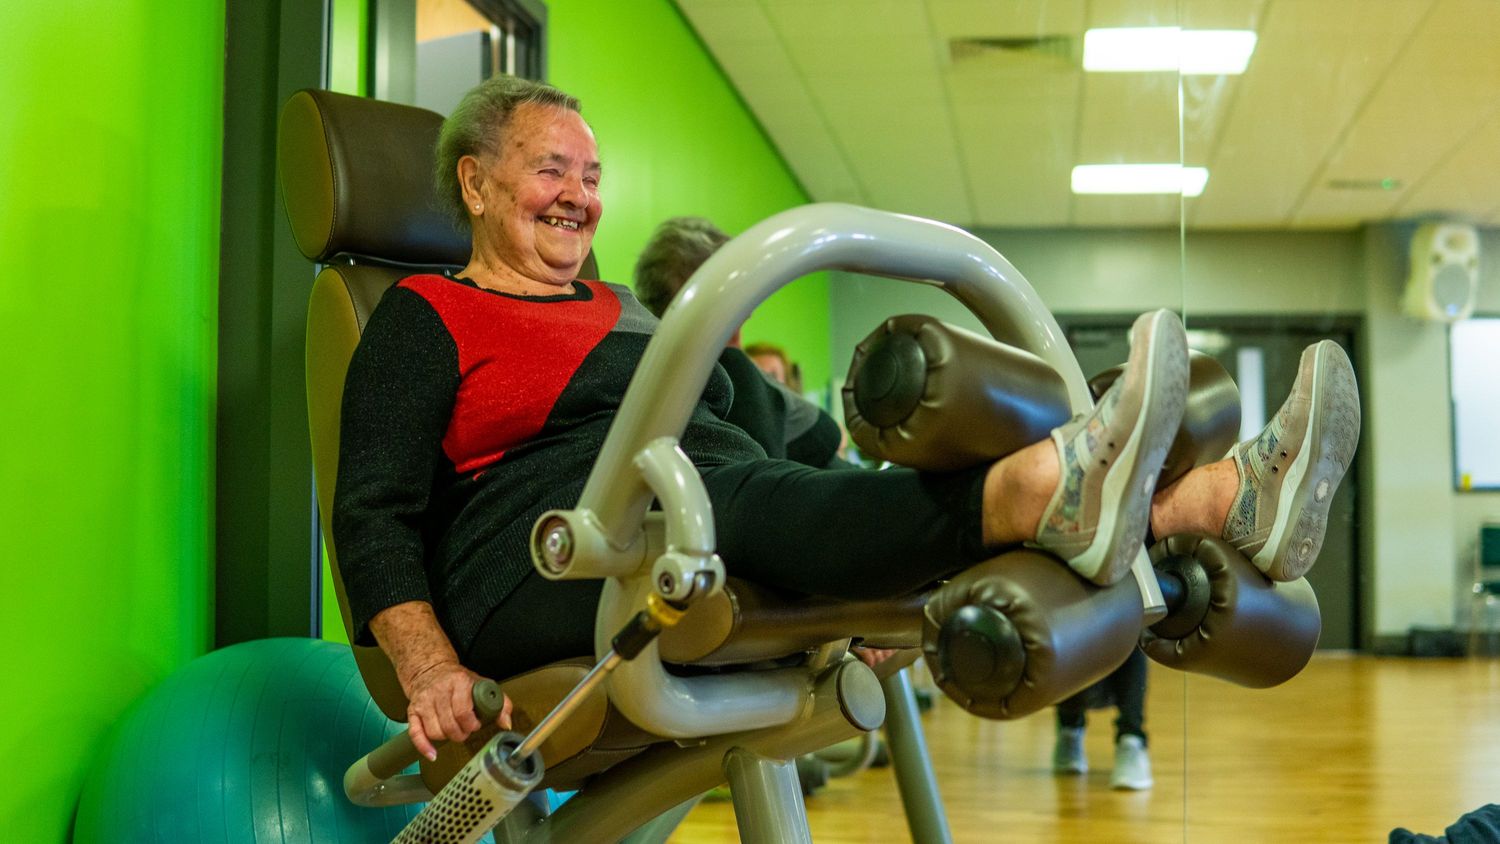 An woman on an exercise machine